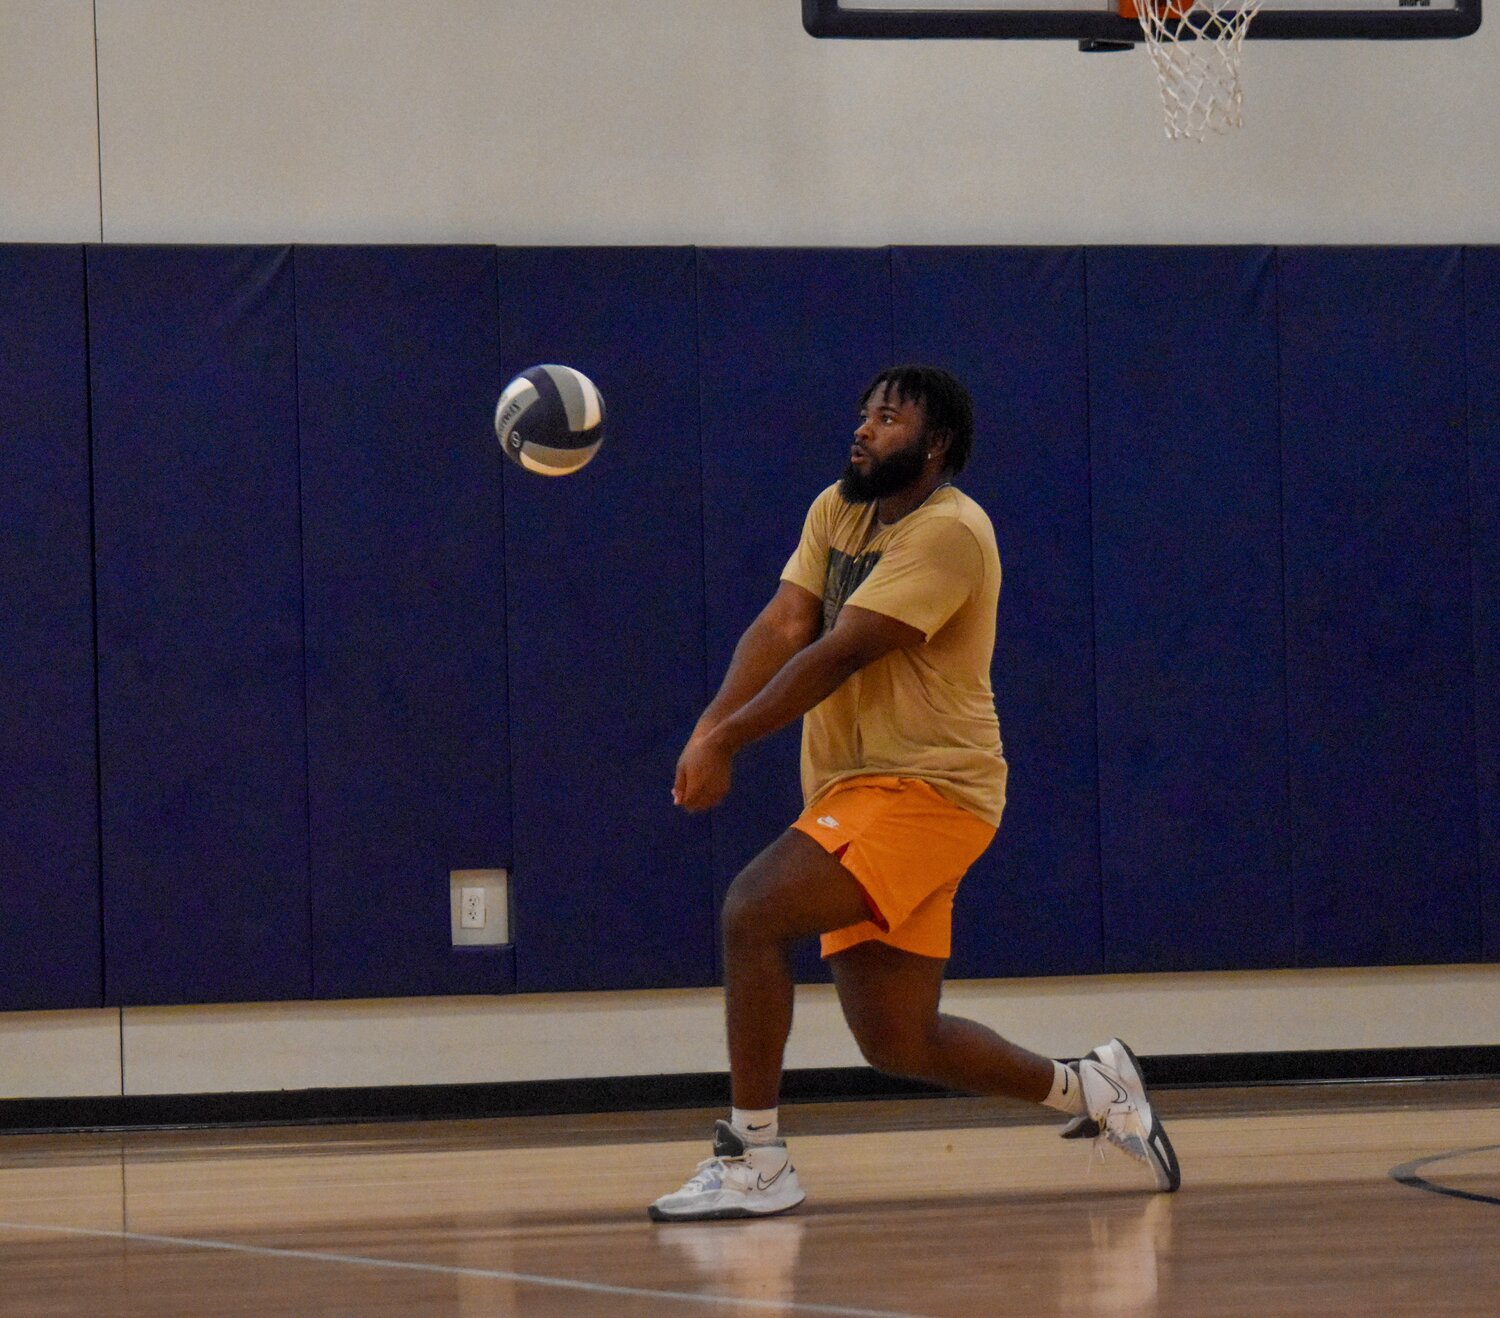 Volleyball players host open gym Tuesdays and Thursdays at NIS at 5:30 p.m.